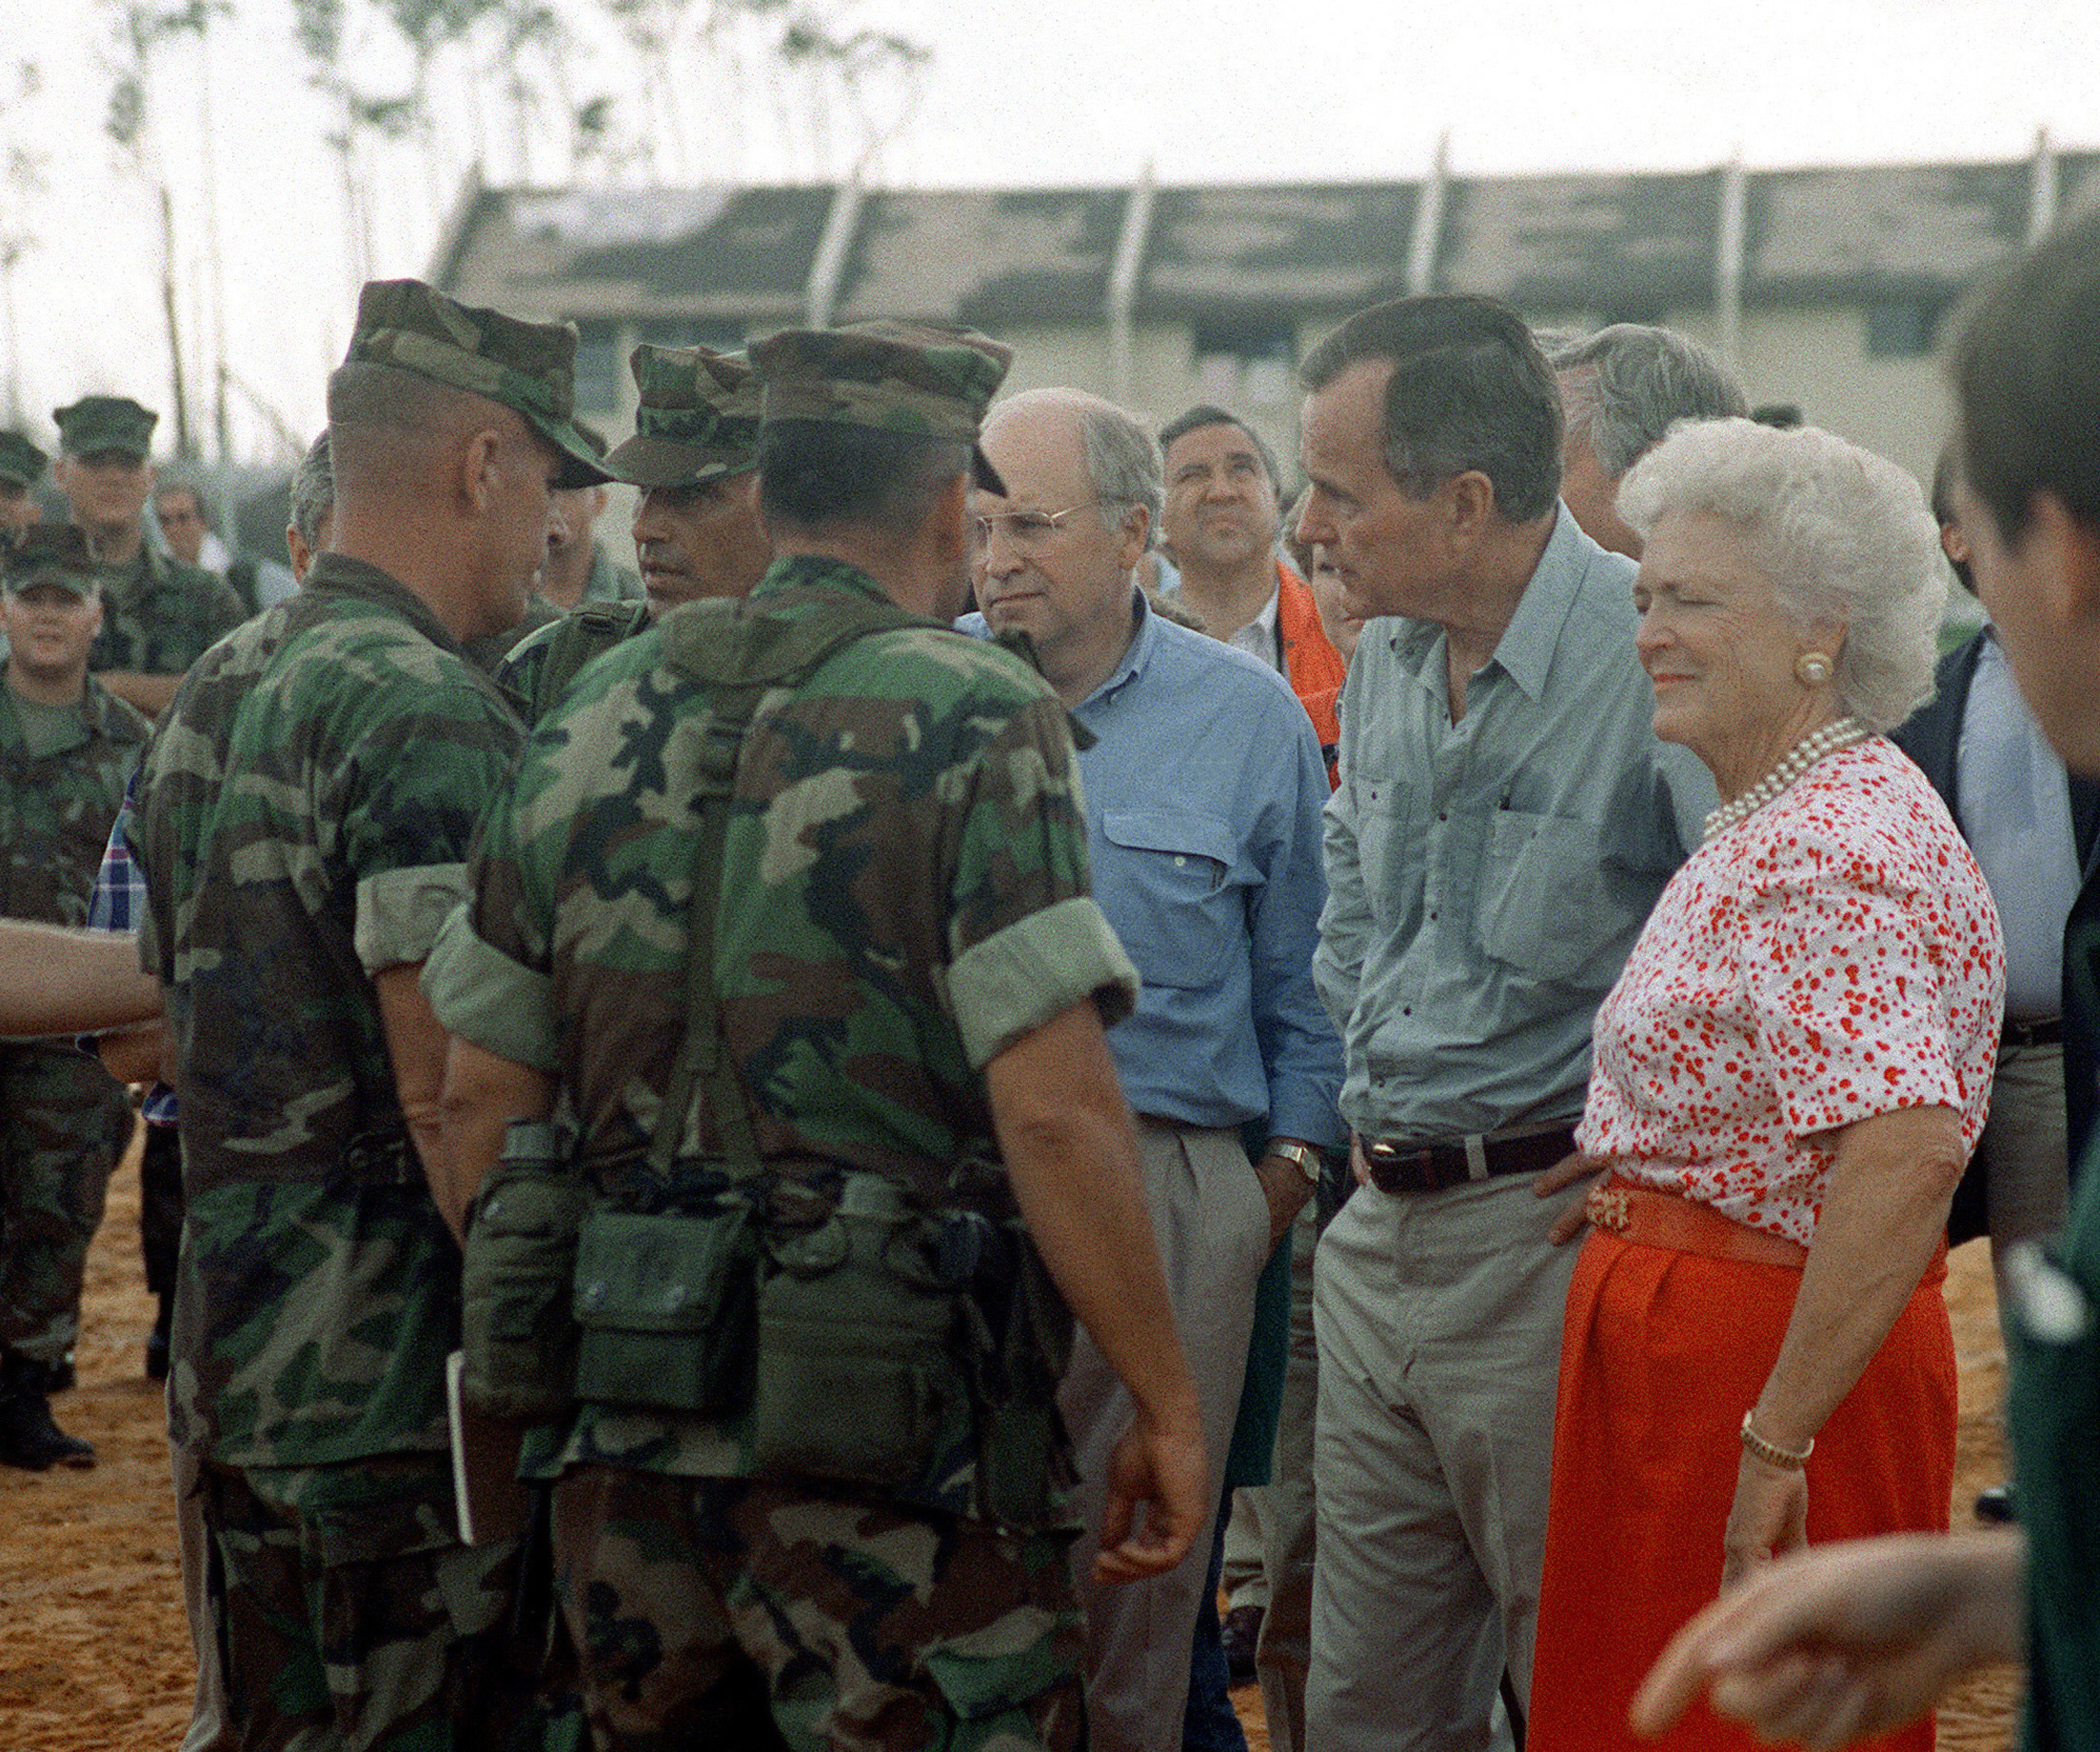 PHOTO: President George Bush, Barbara Bush, and Secretary of Defense Richard Cheney visit with Marines taking part in the disaster relief efforts in the aftermath of Hurricane Andrew, in Homestead, Florida, on Sept. 1, 1992.